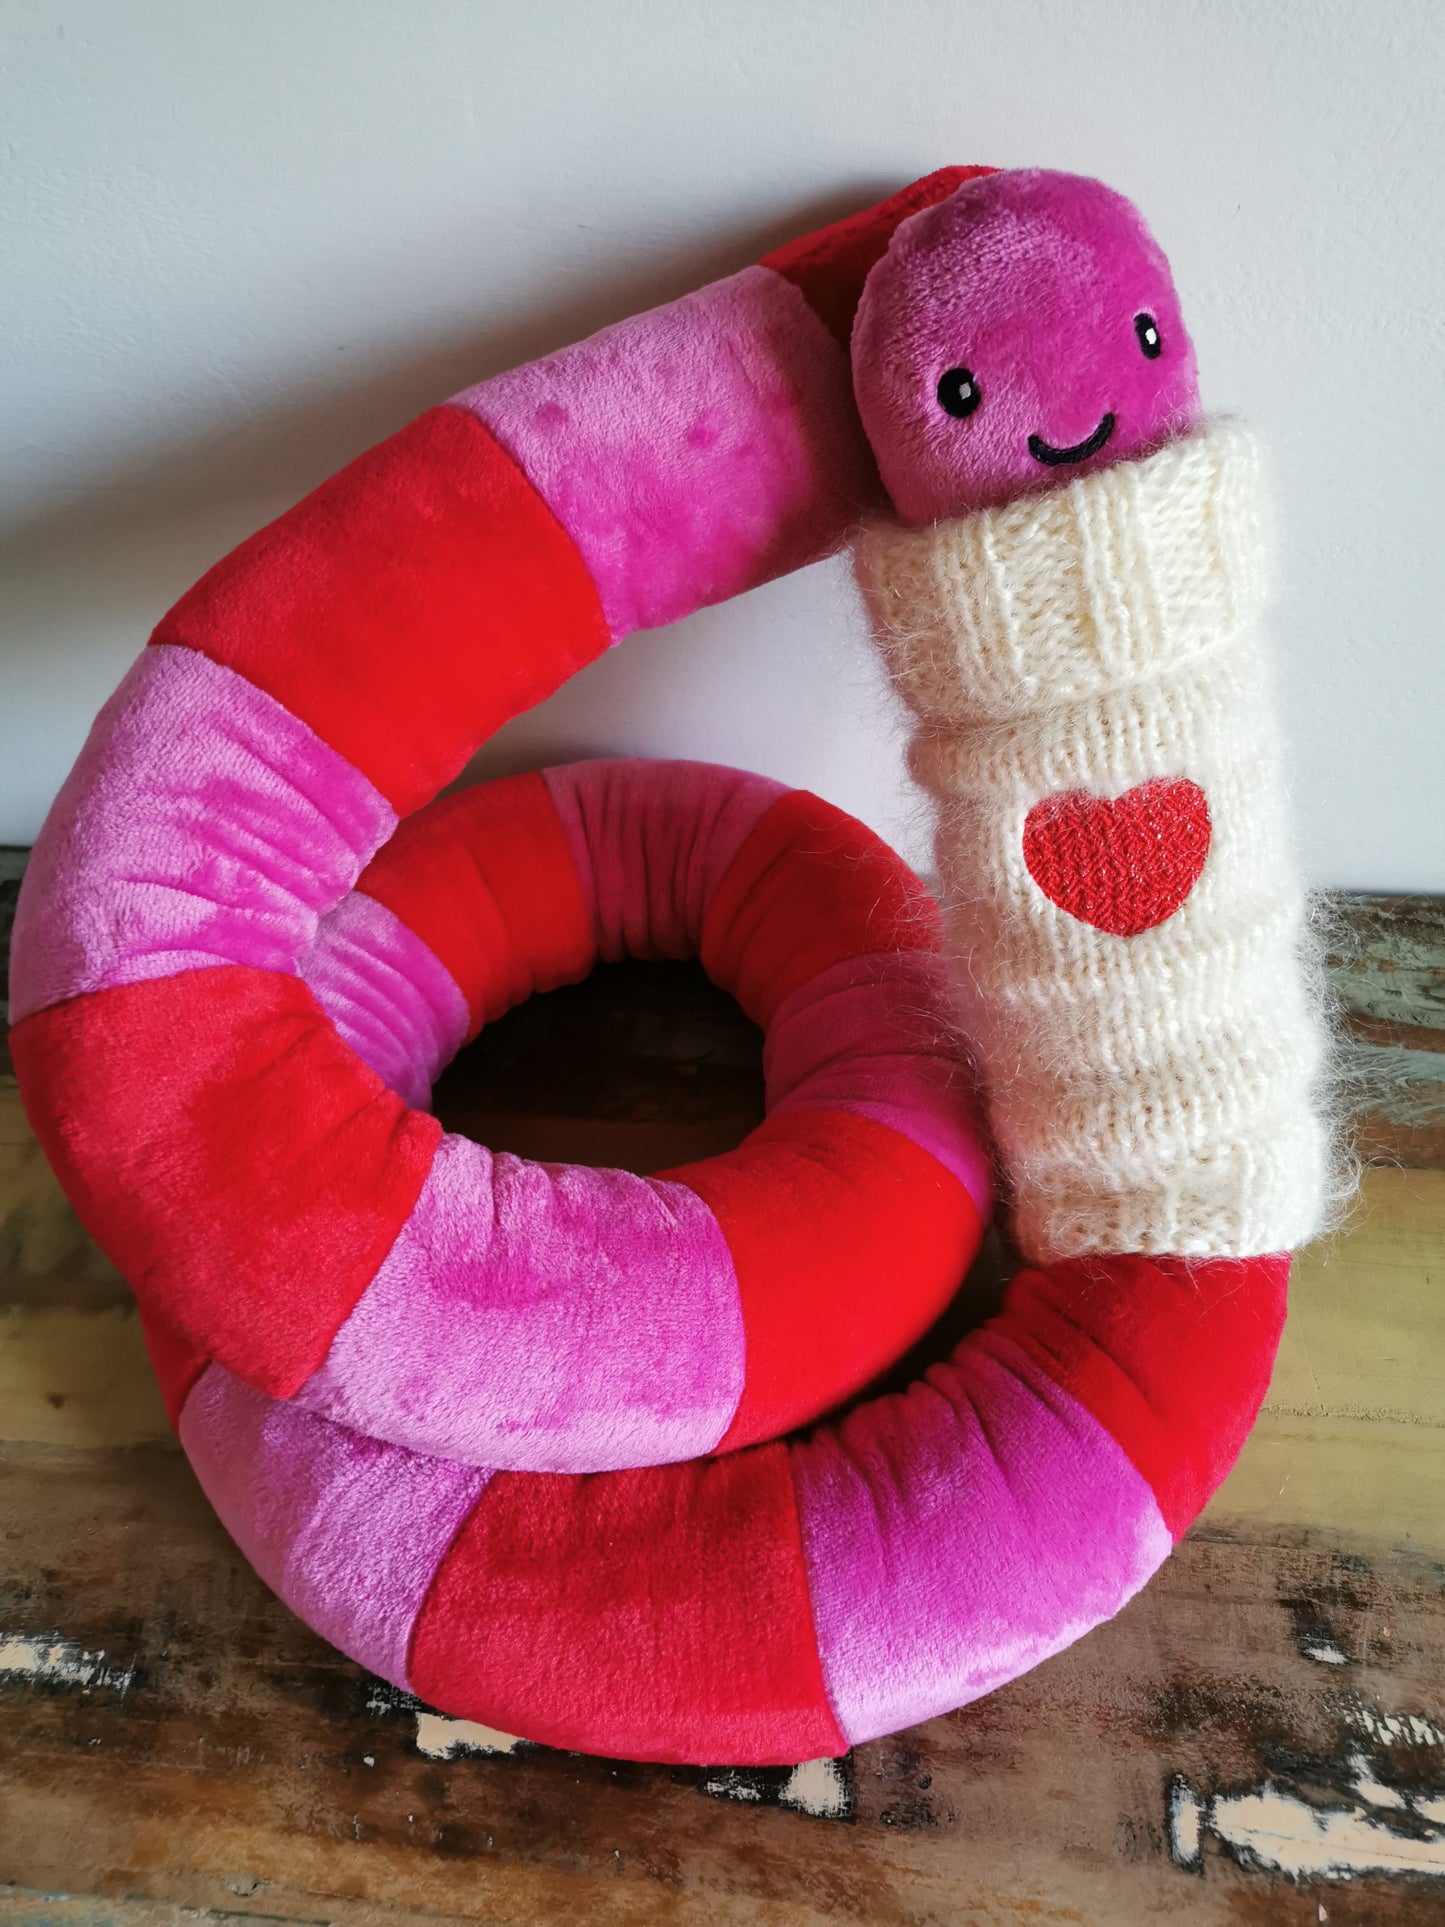 Cuddle Buddy Extraordinaire: The Giant Worm Plush in Chic Knitted Sweater - 200cm of Pure Fun!